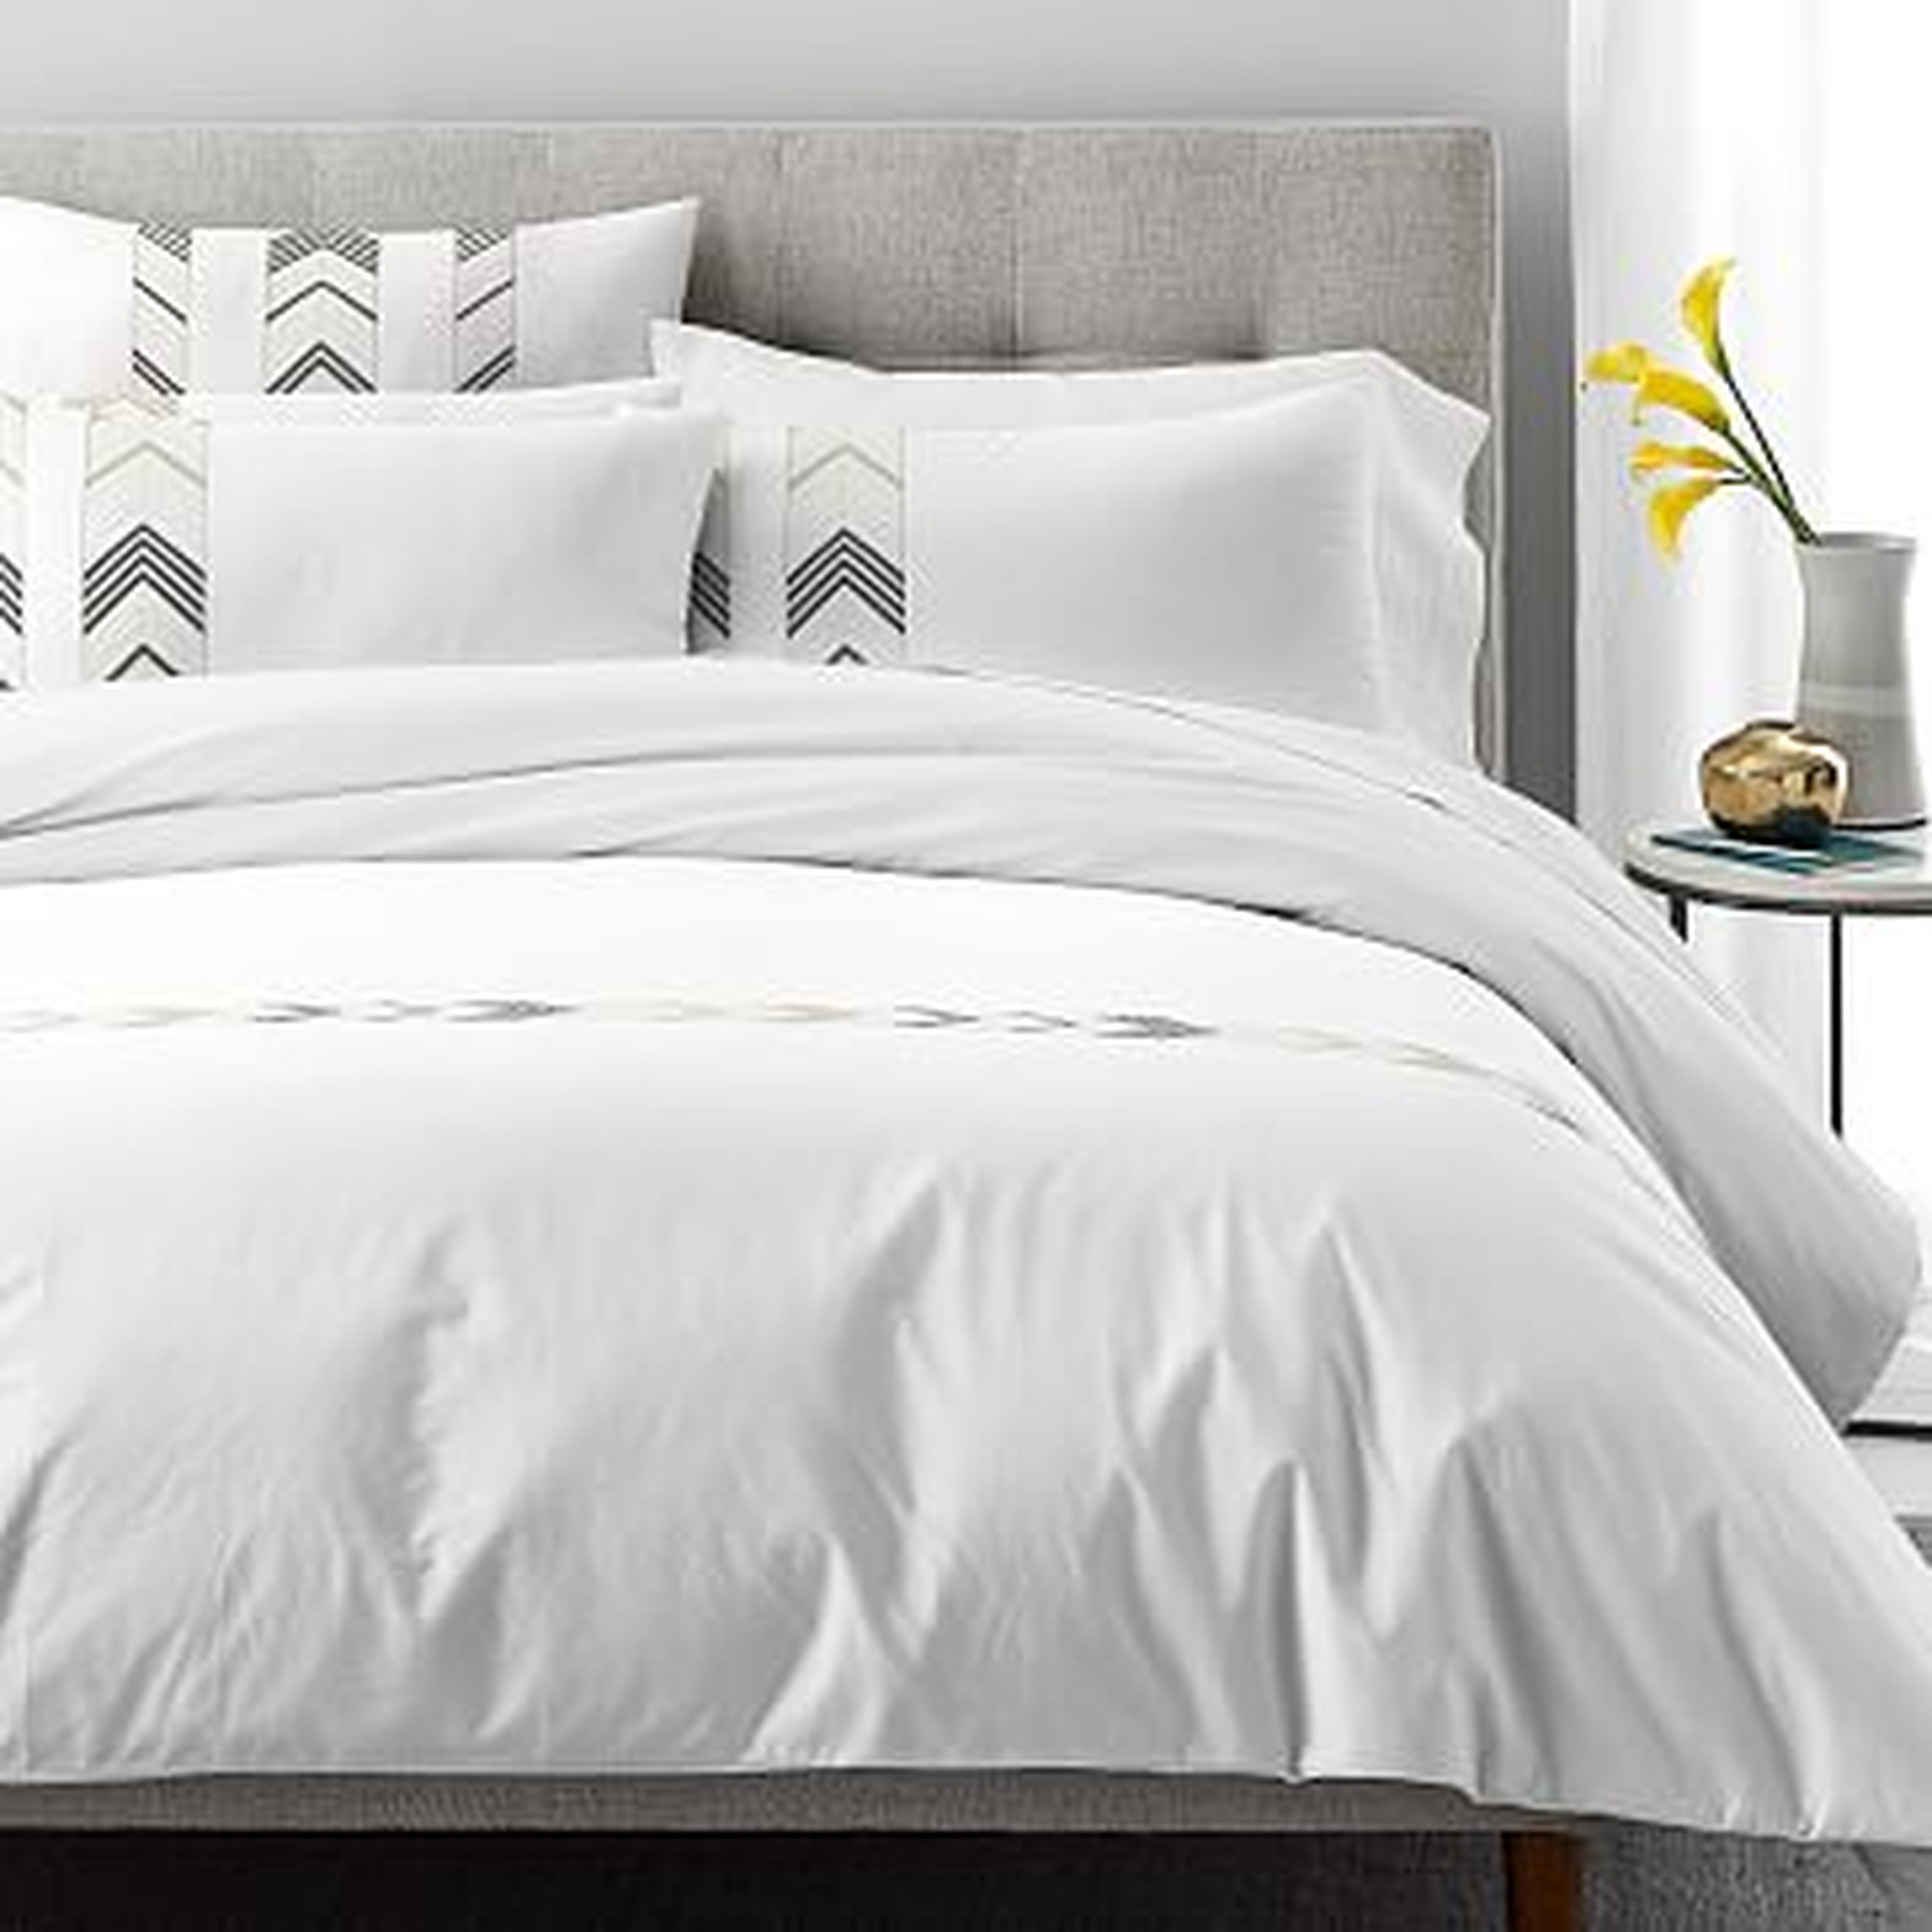 Percale Chasing Arrows Embroidery Duvet, Full/Queen, Stone White + Belgian Flax + Iron Gate - West Elm